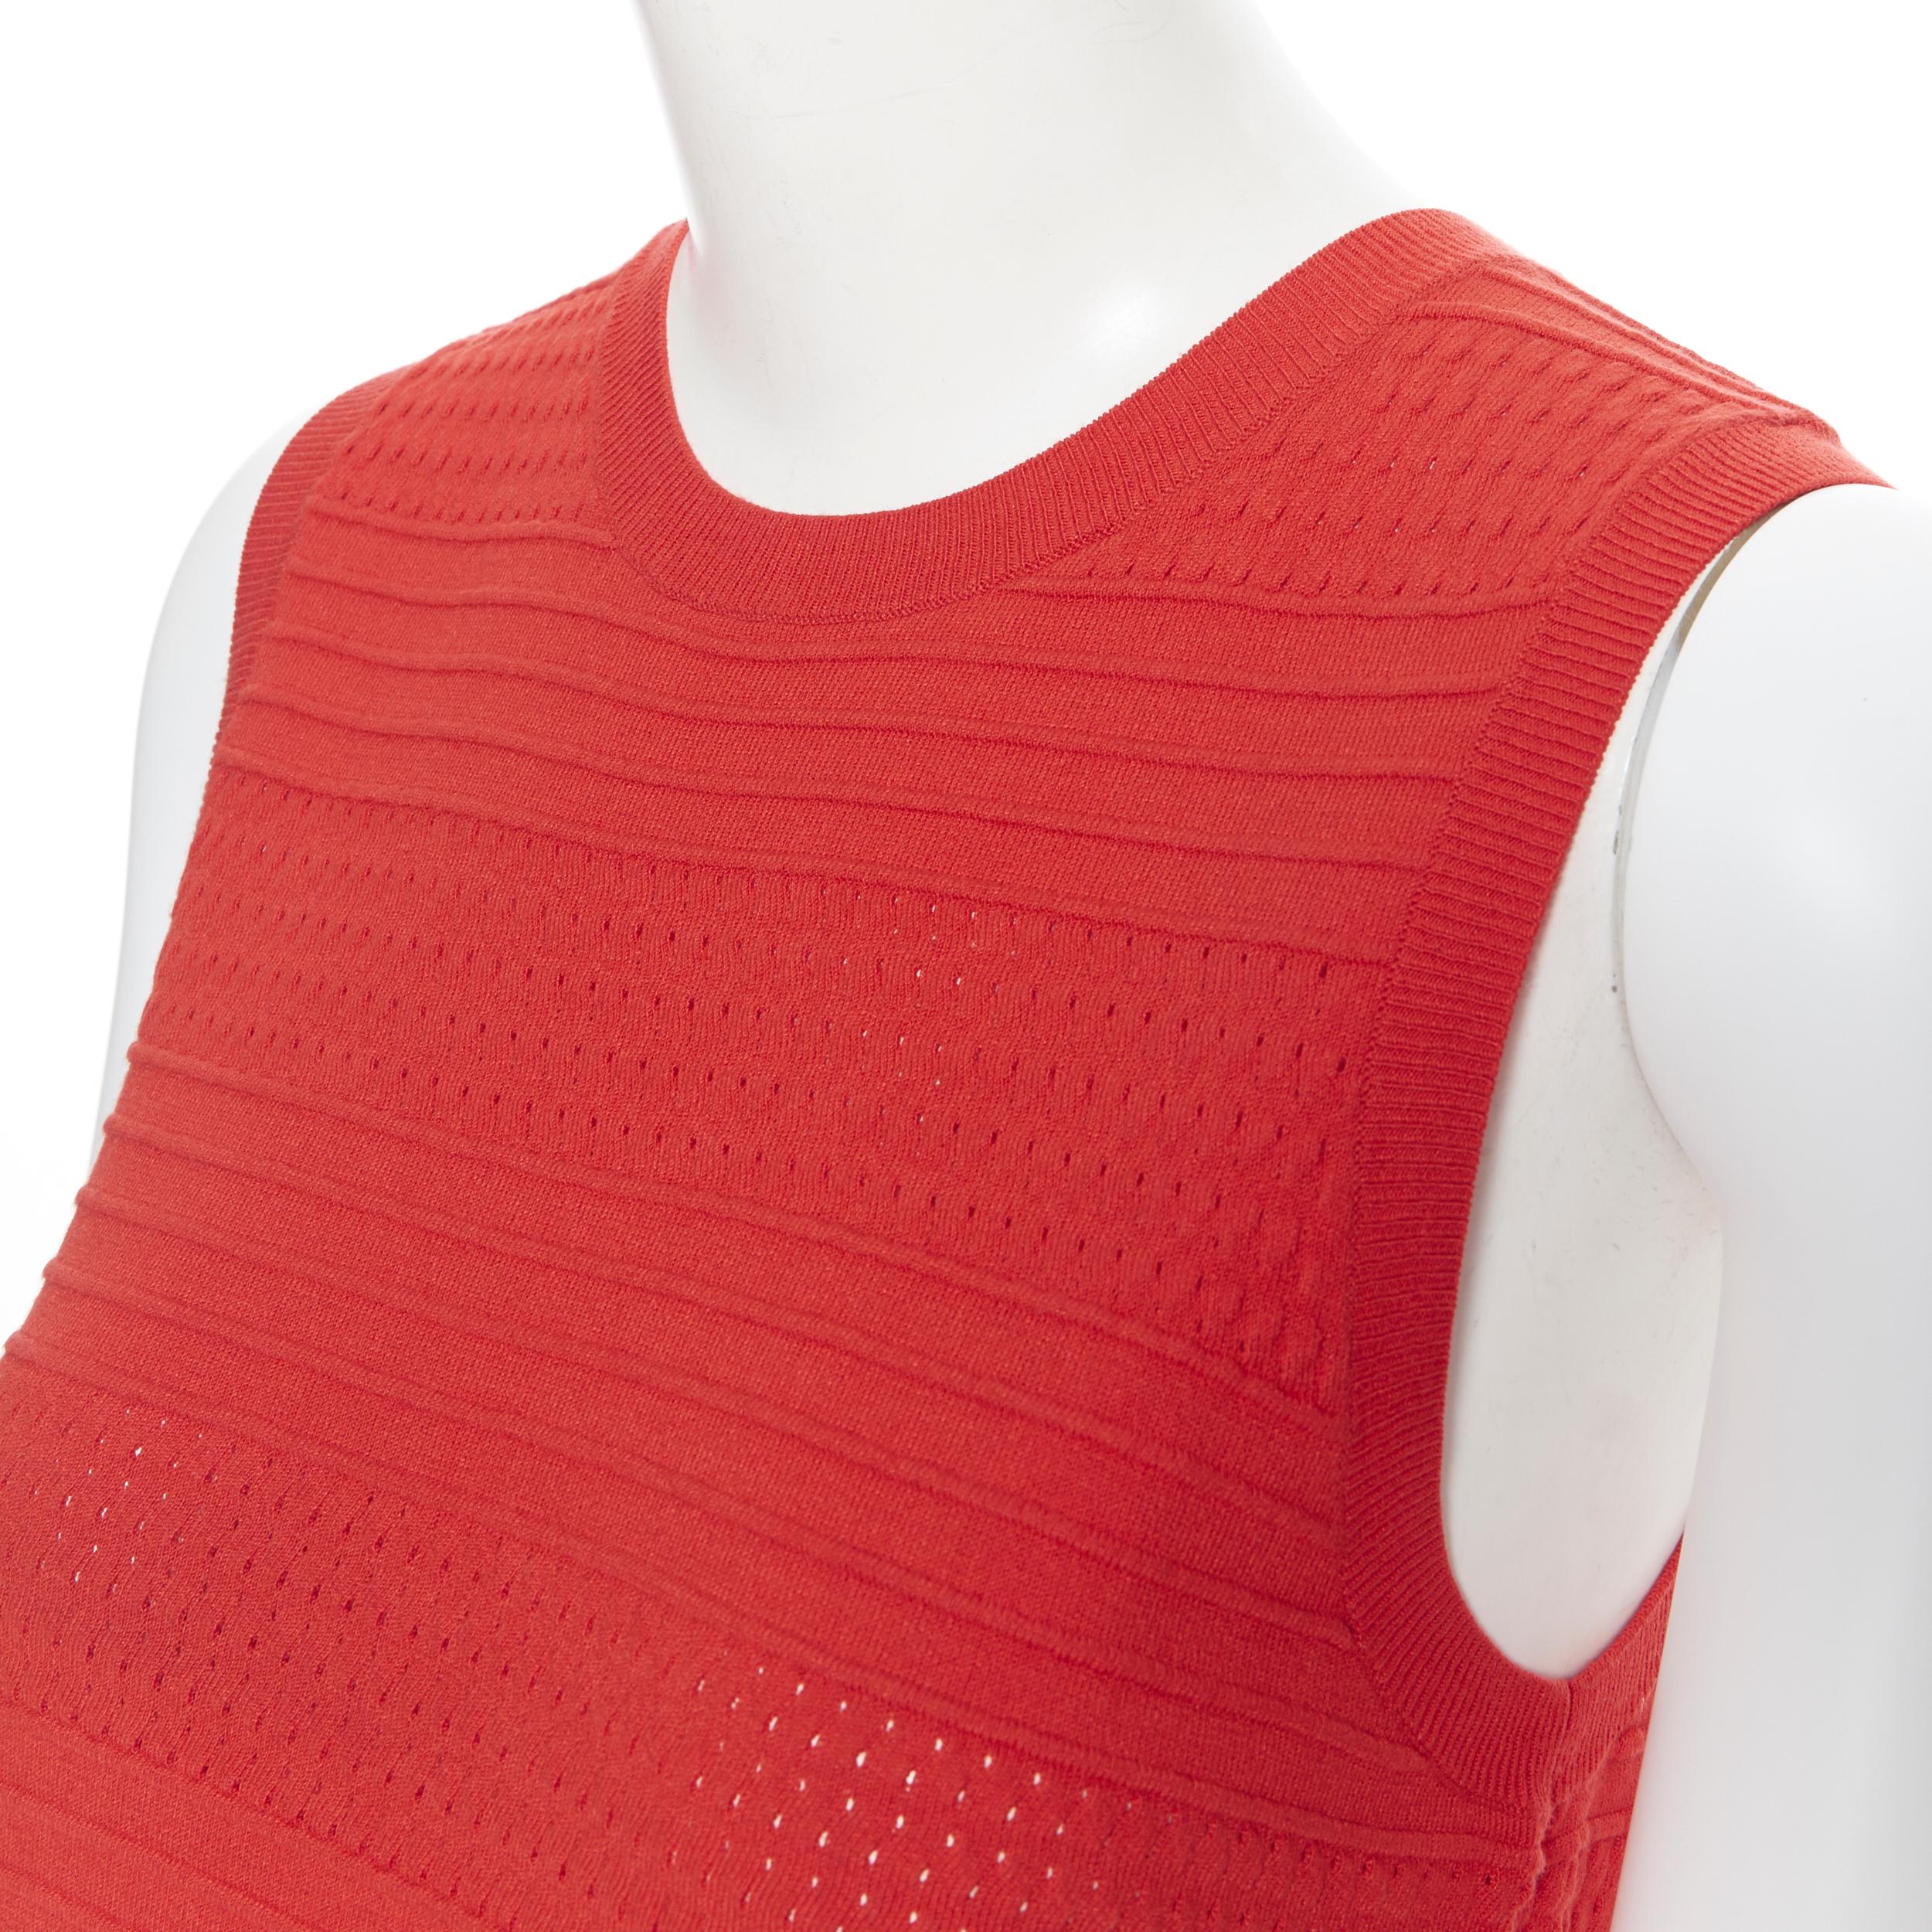 THEORY red polyester textured jacquard knit sleeveless vest top XS
Brand: Theory
Model Name / Style: Knitted vest
Material: Polyester
Color: Red
Pattern: Solid
Extra Detail: Textured knit. Sleeveless. Round neck neckline.
Made in: China

CONDITION: